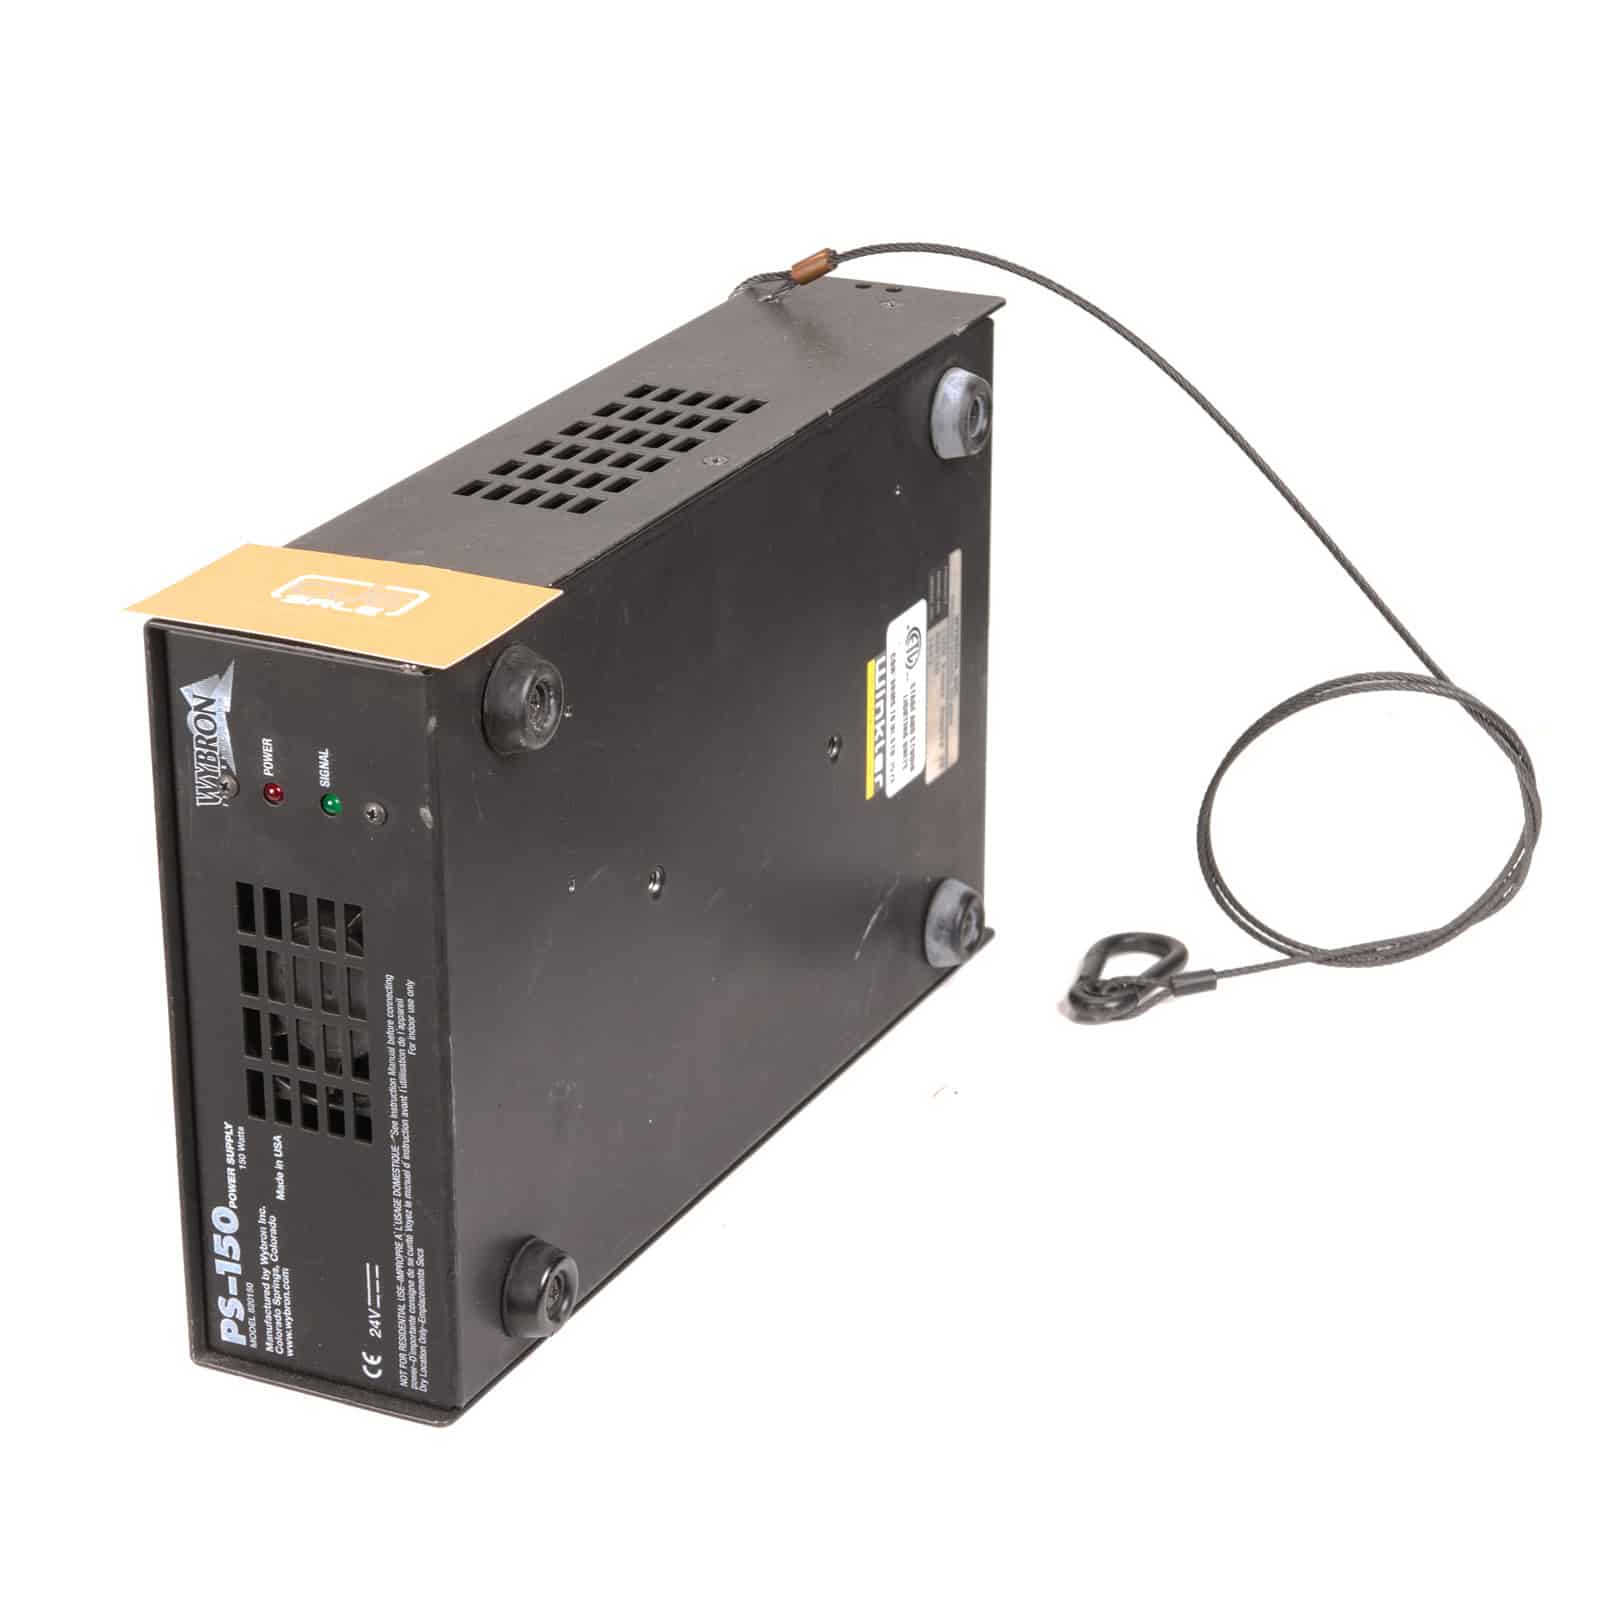 Acuity Controls PS 150 Power Supply 184FYF for sale online 